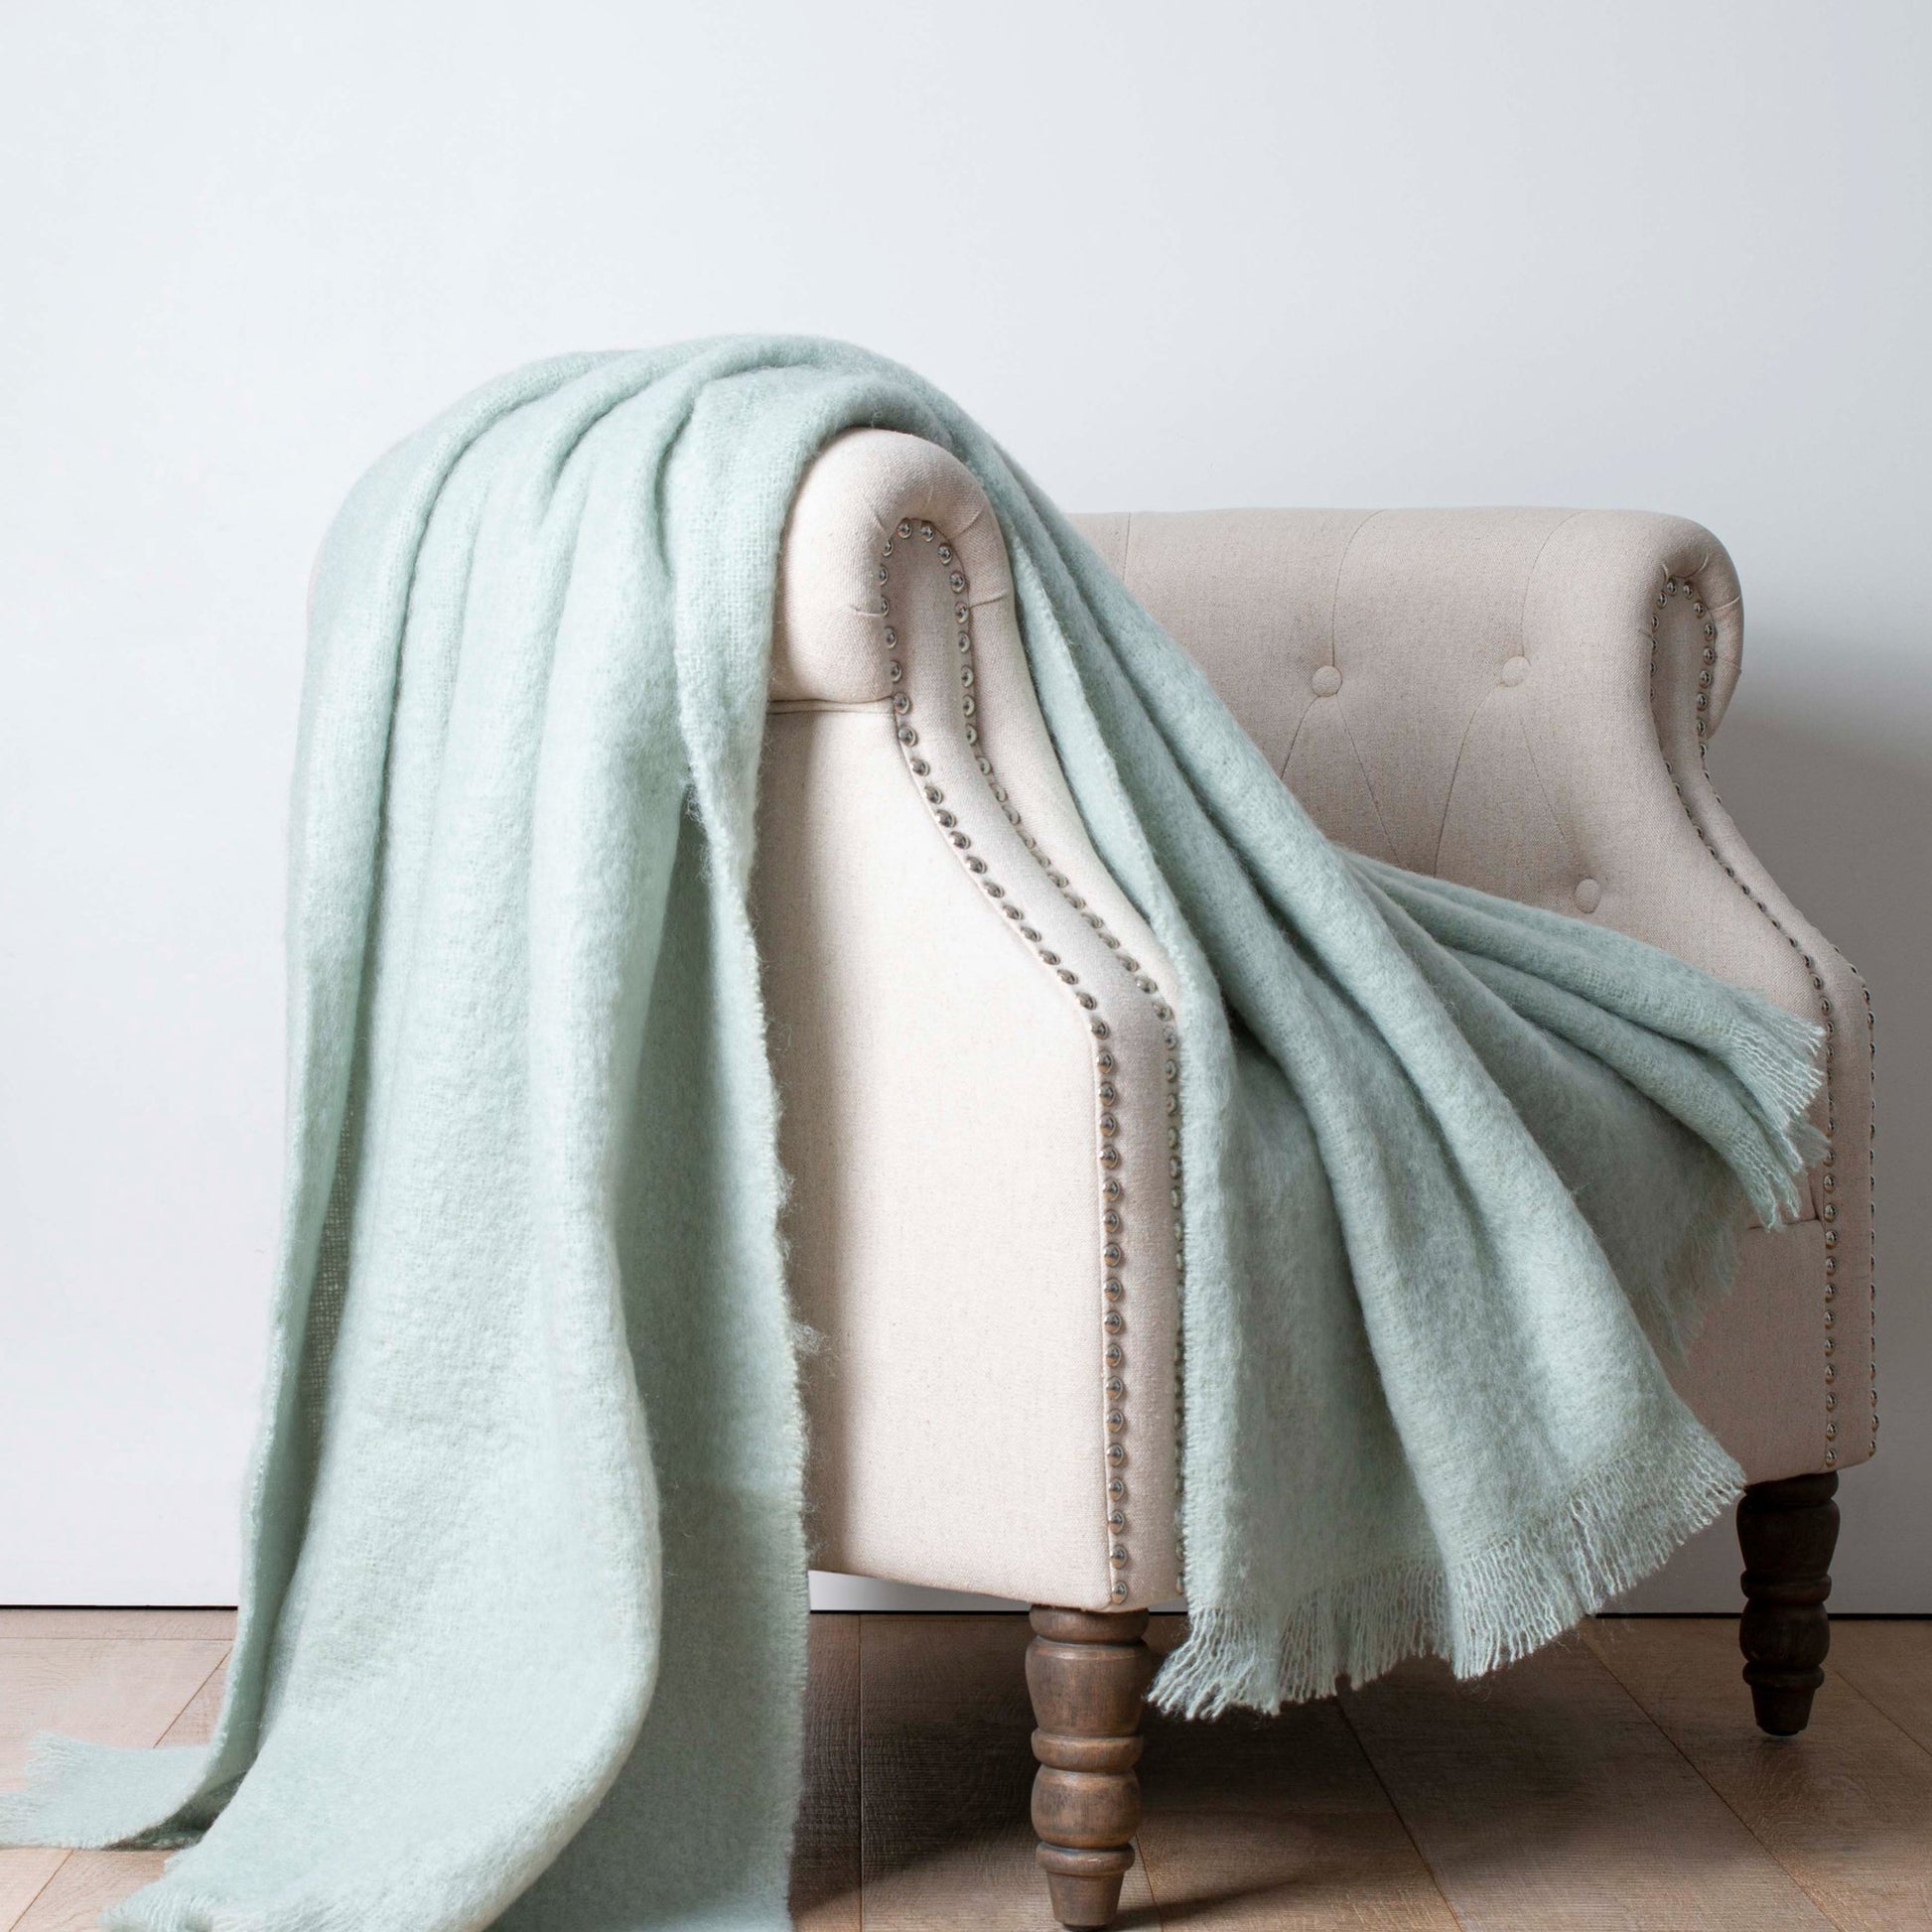 Soft Mohair luxury throws from Glamorous Goat.  Mohair throw in mint green  available at My Sanctuary